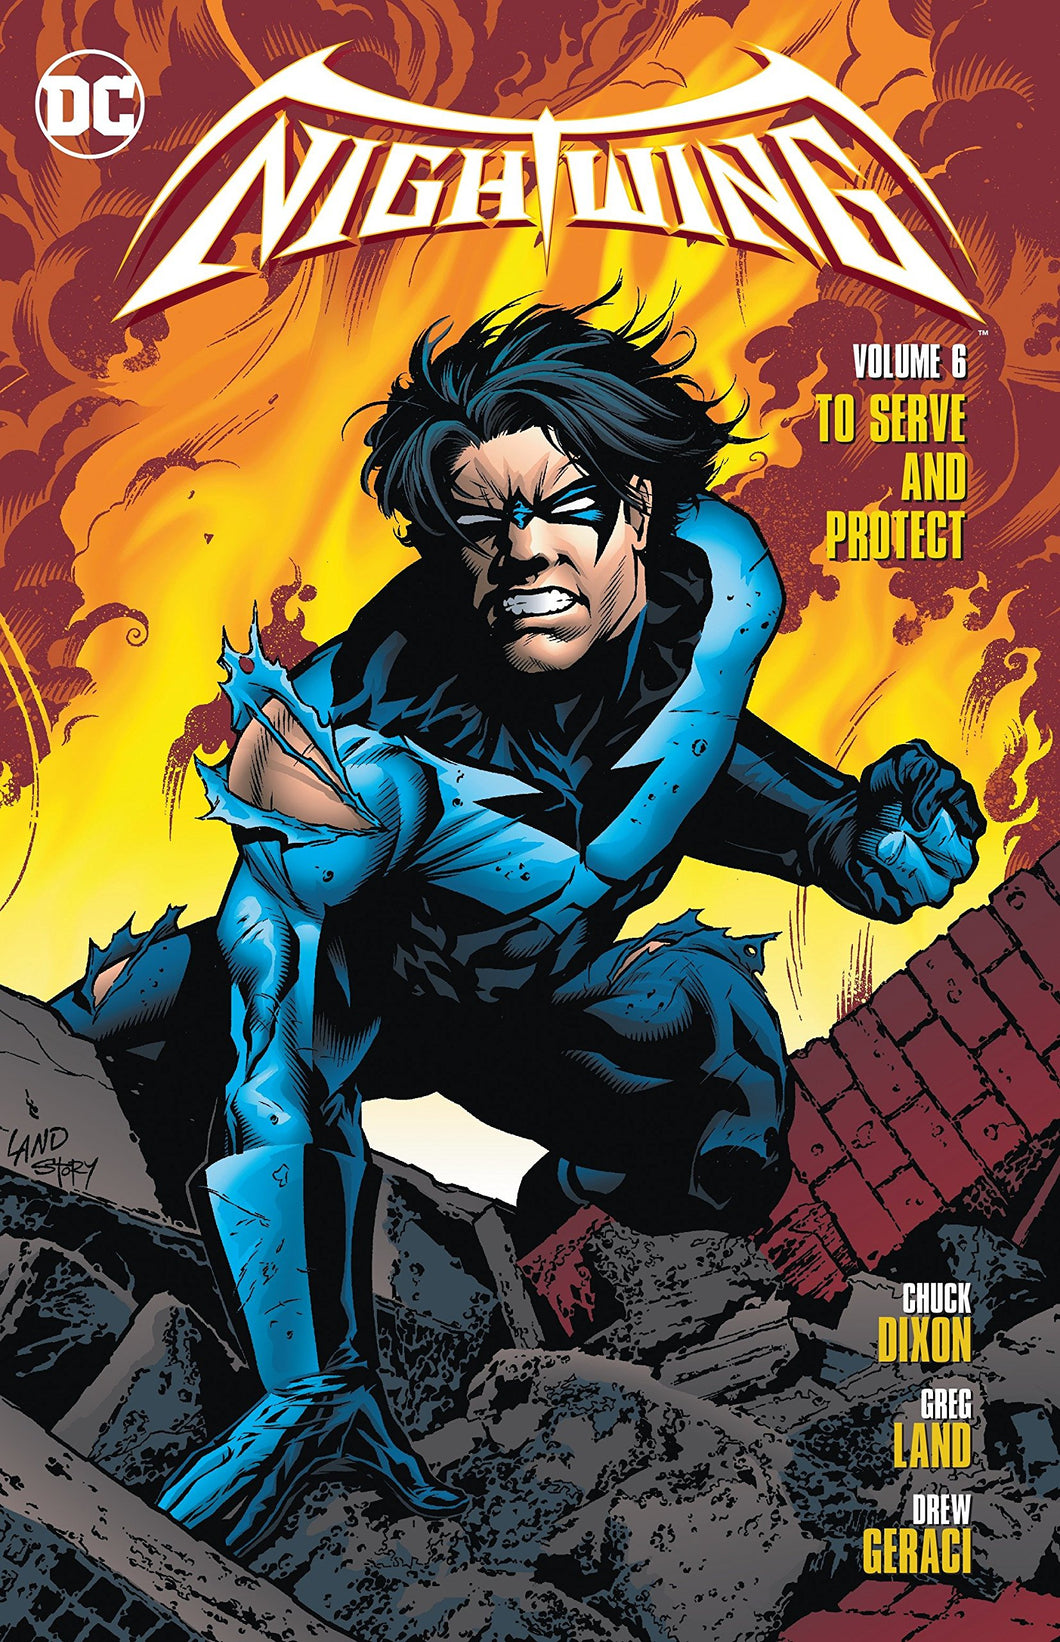 Nightwing Vol. 6 : To Serve and Protect